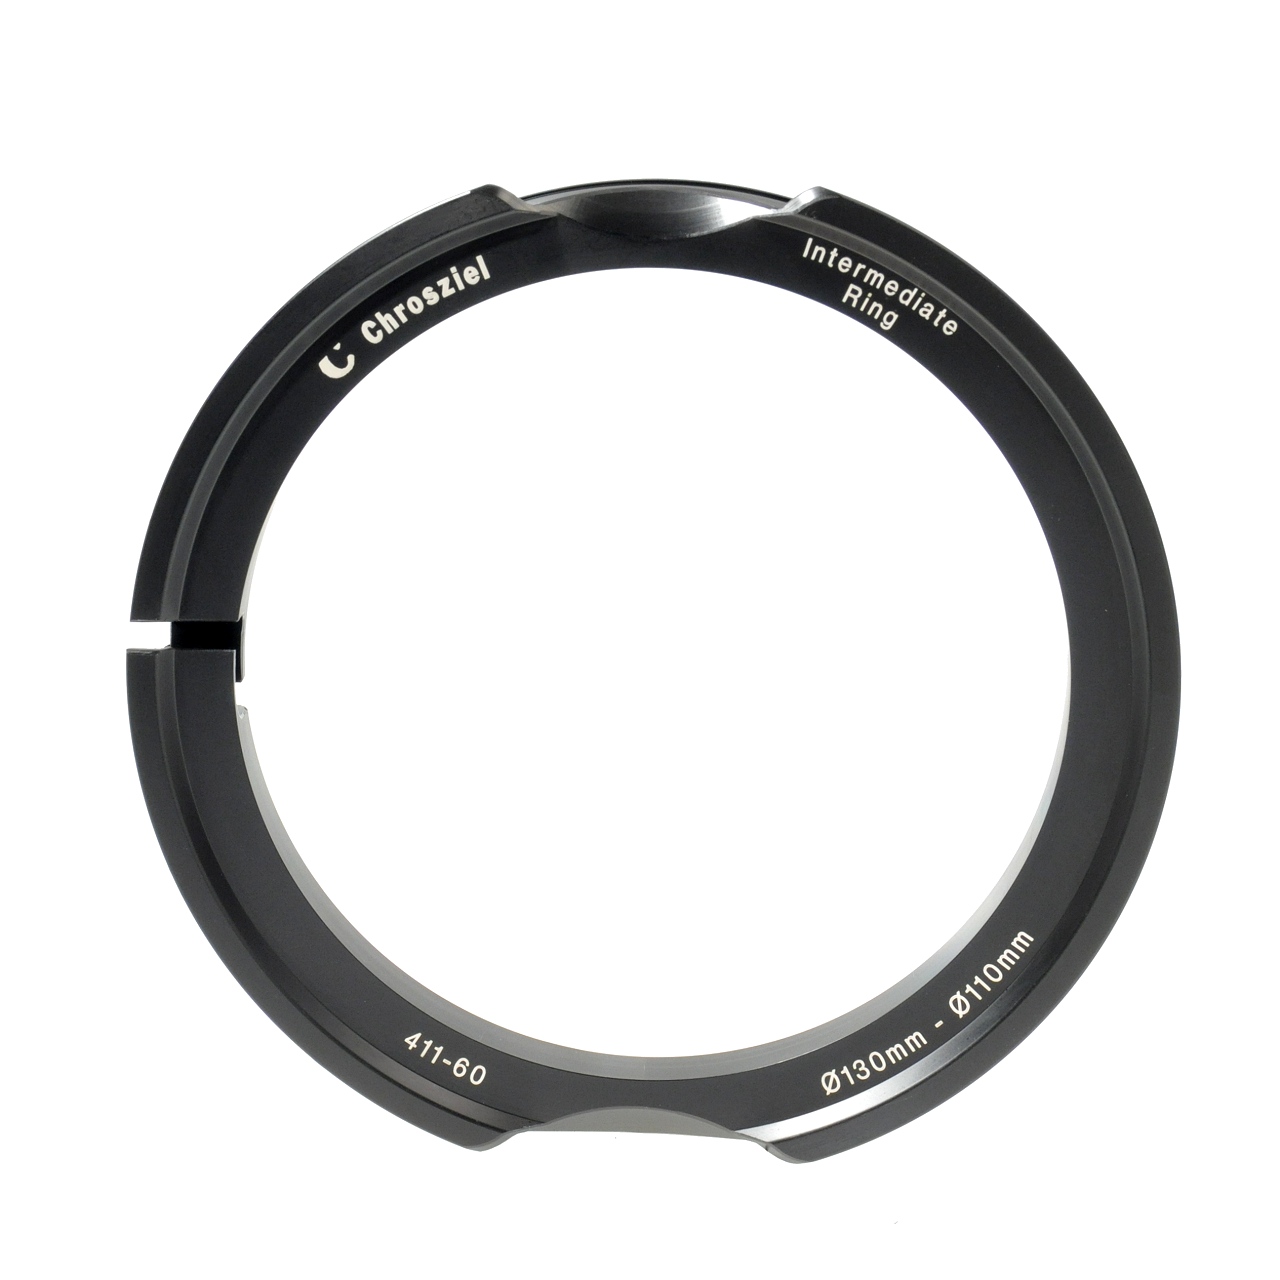 Intermediate Ring 130:110mm for MB456-MB450